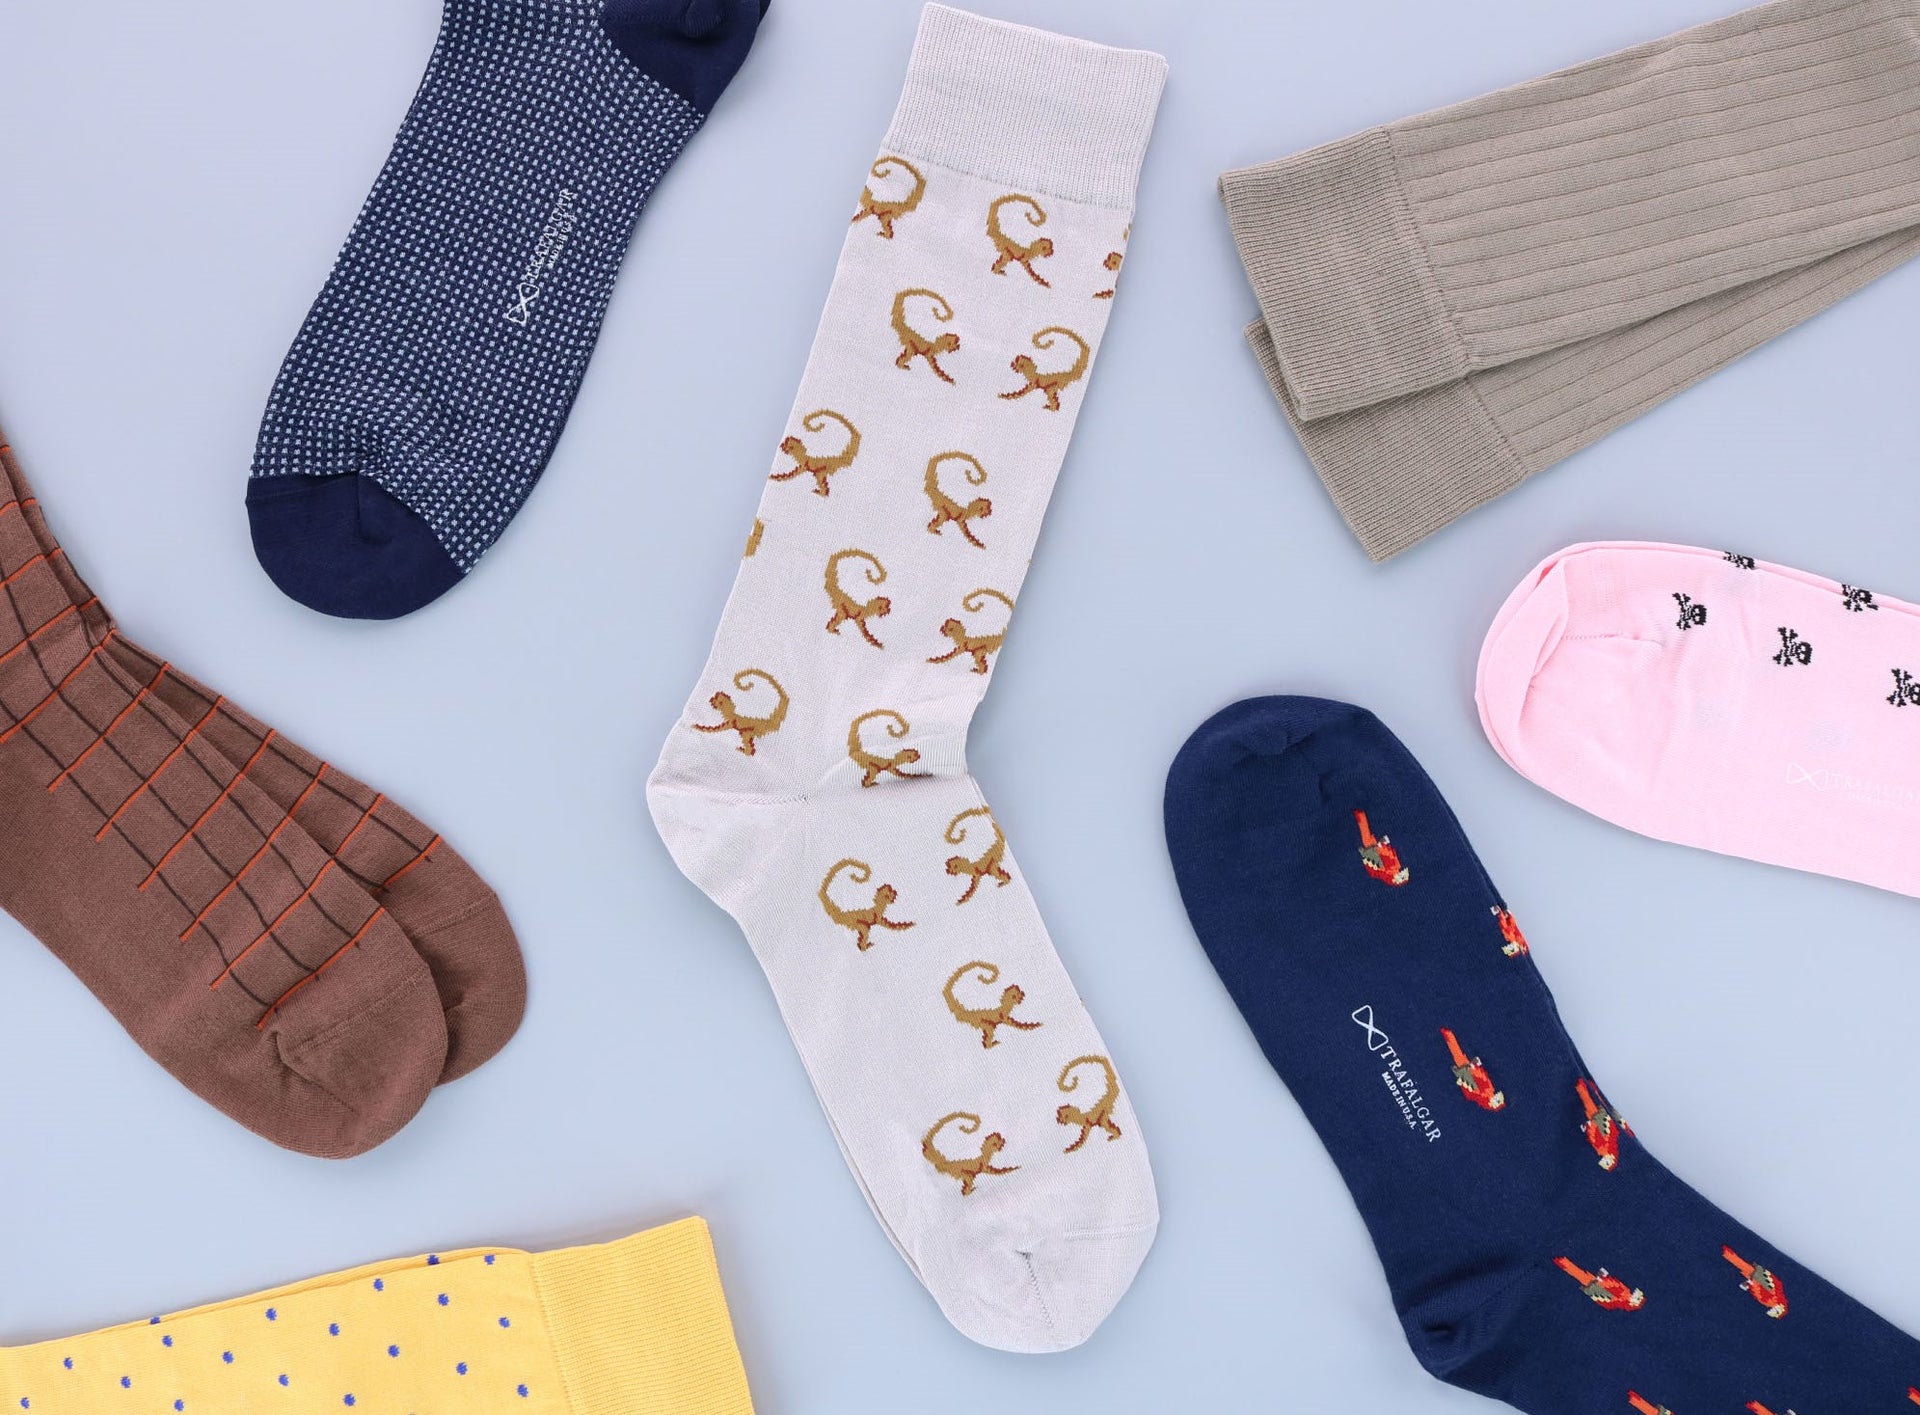 Six dress socks in various colors and patterns